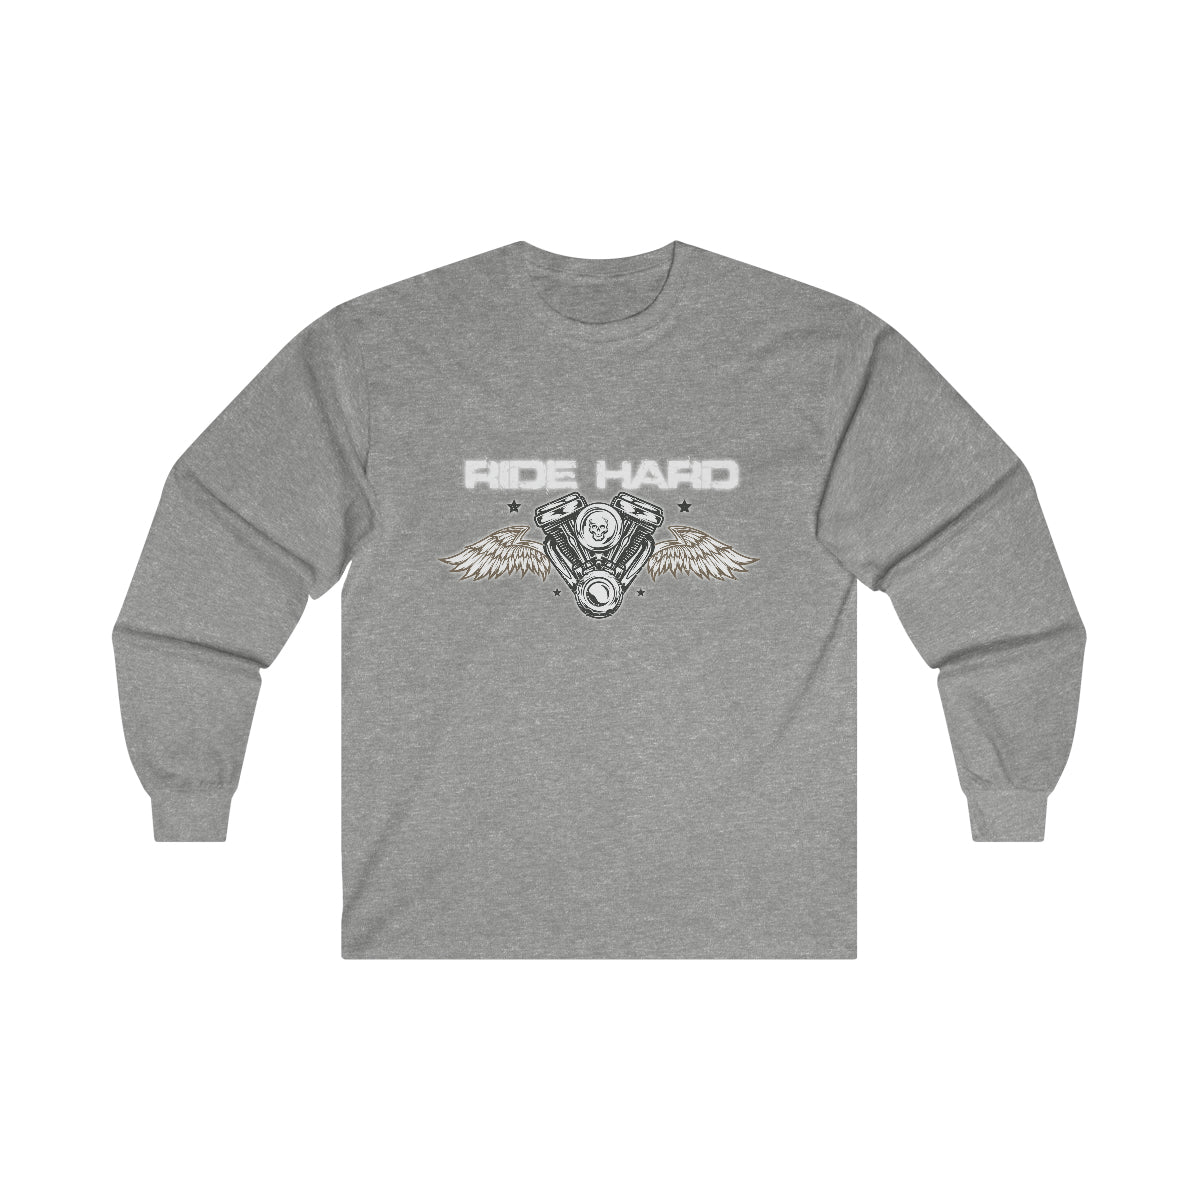 Ride Hard (White Letters ) Ultra Cotton Long Sleeve Tee